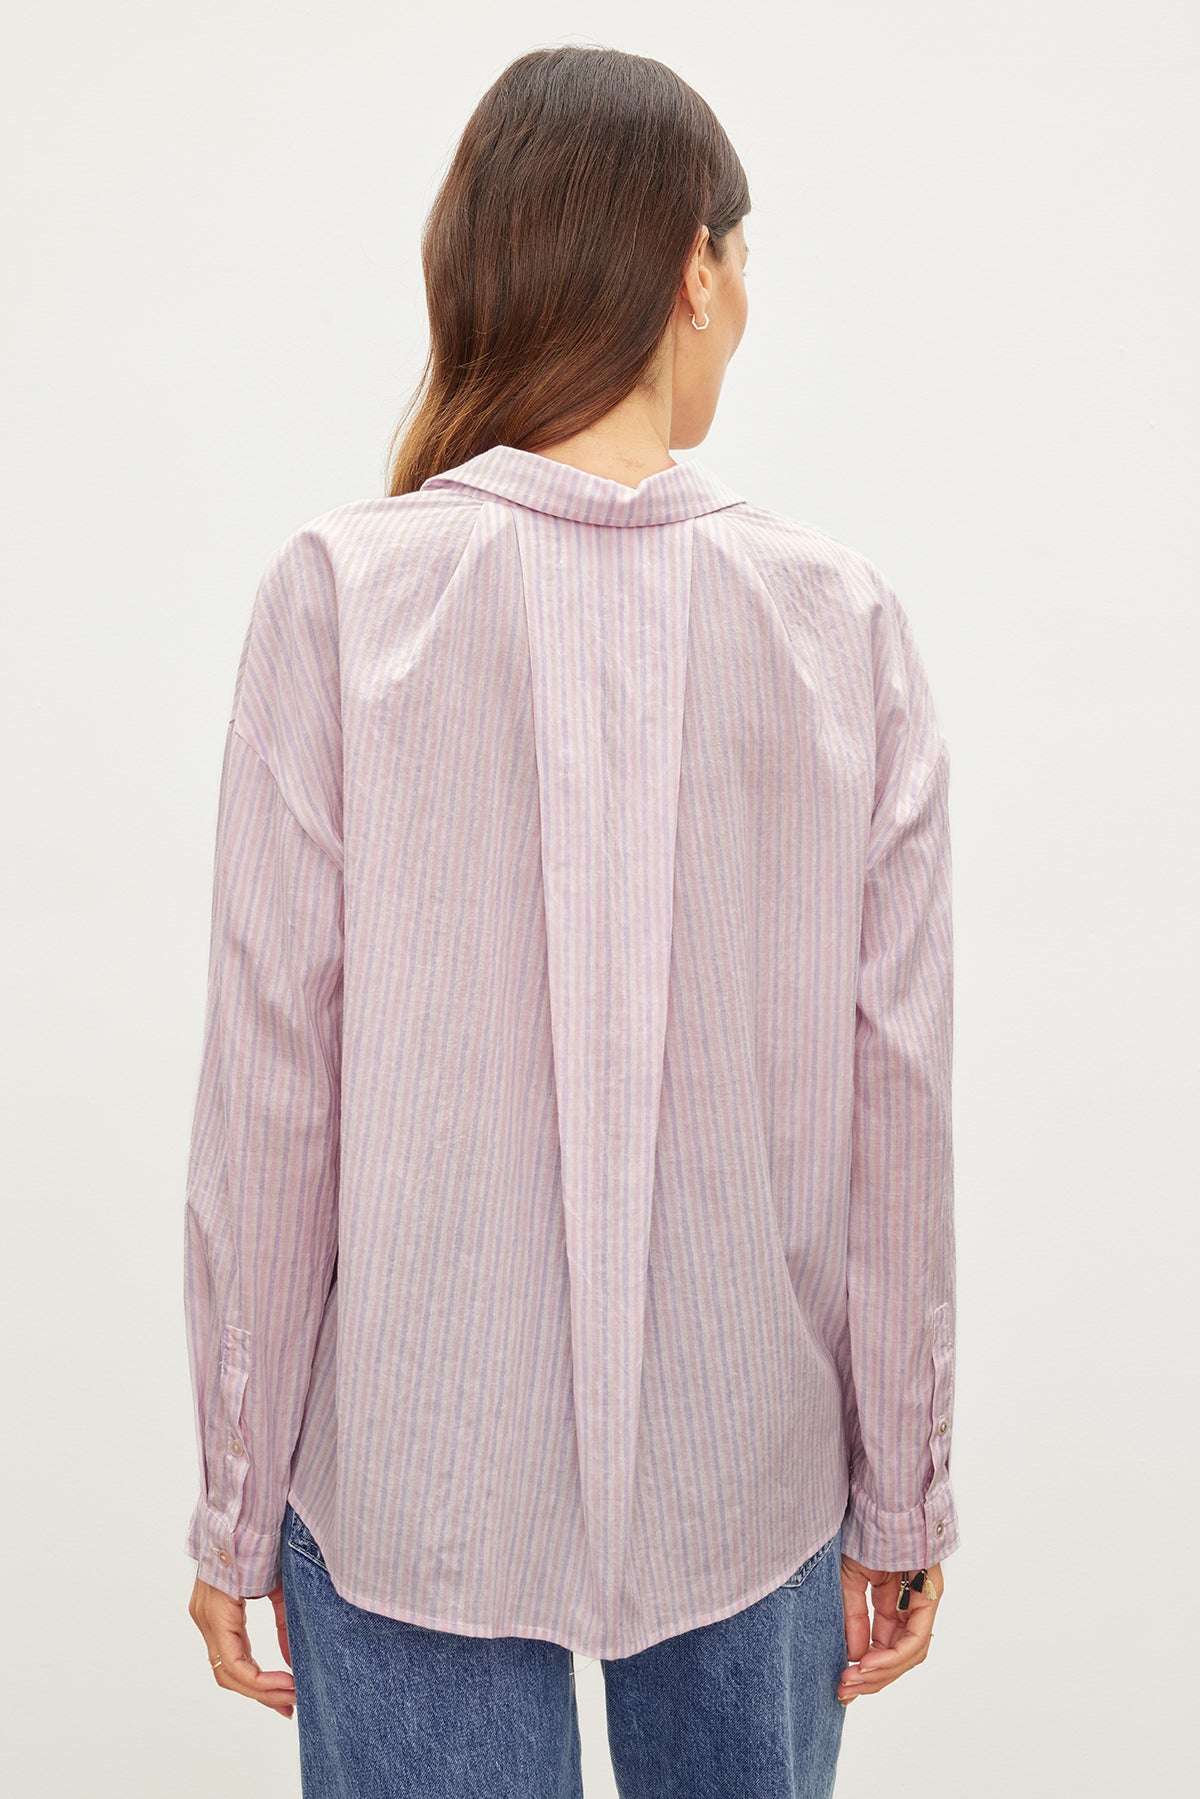 The back view of a woman wearing Velvet by Graham & Spencer's ASHLYN STRIPED BUTTON-UP SHIRT, a wardrobe staple.-35955417972929